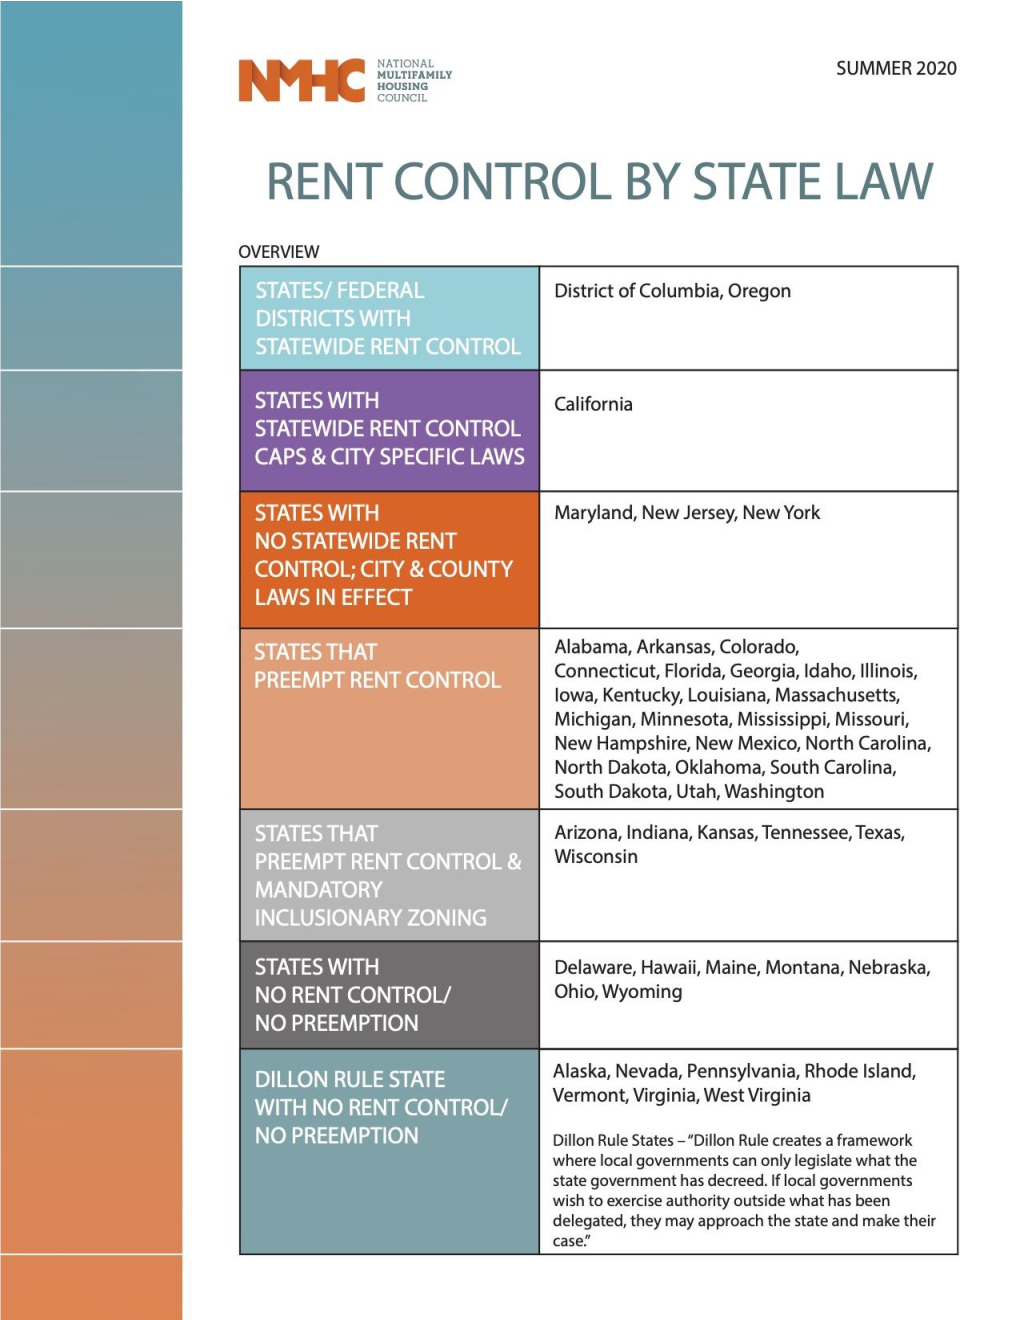 Rent Control by State